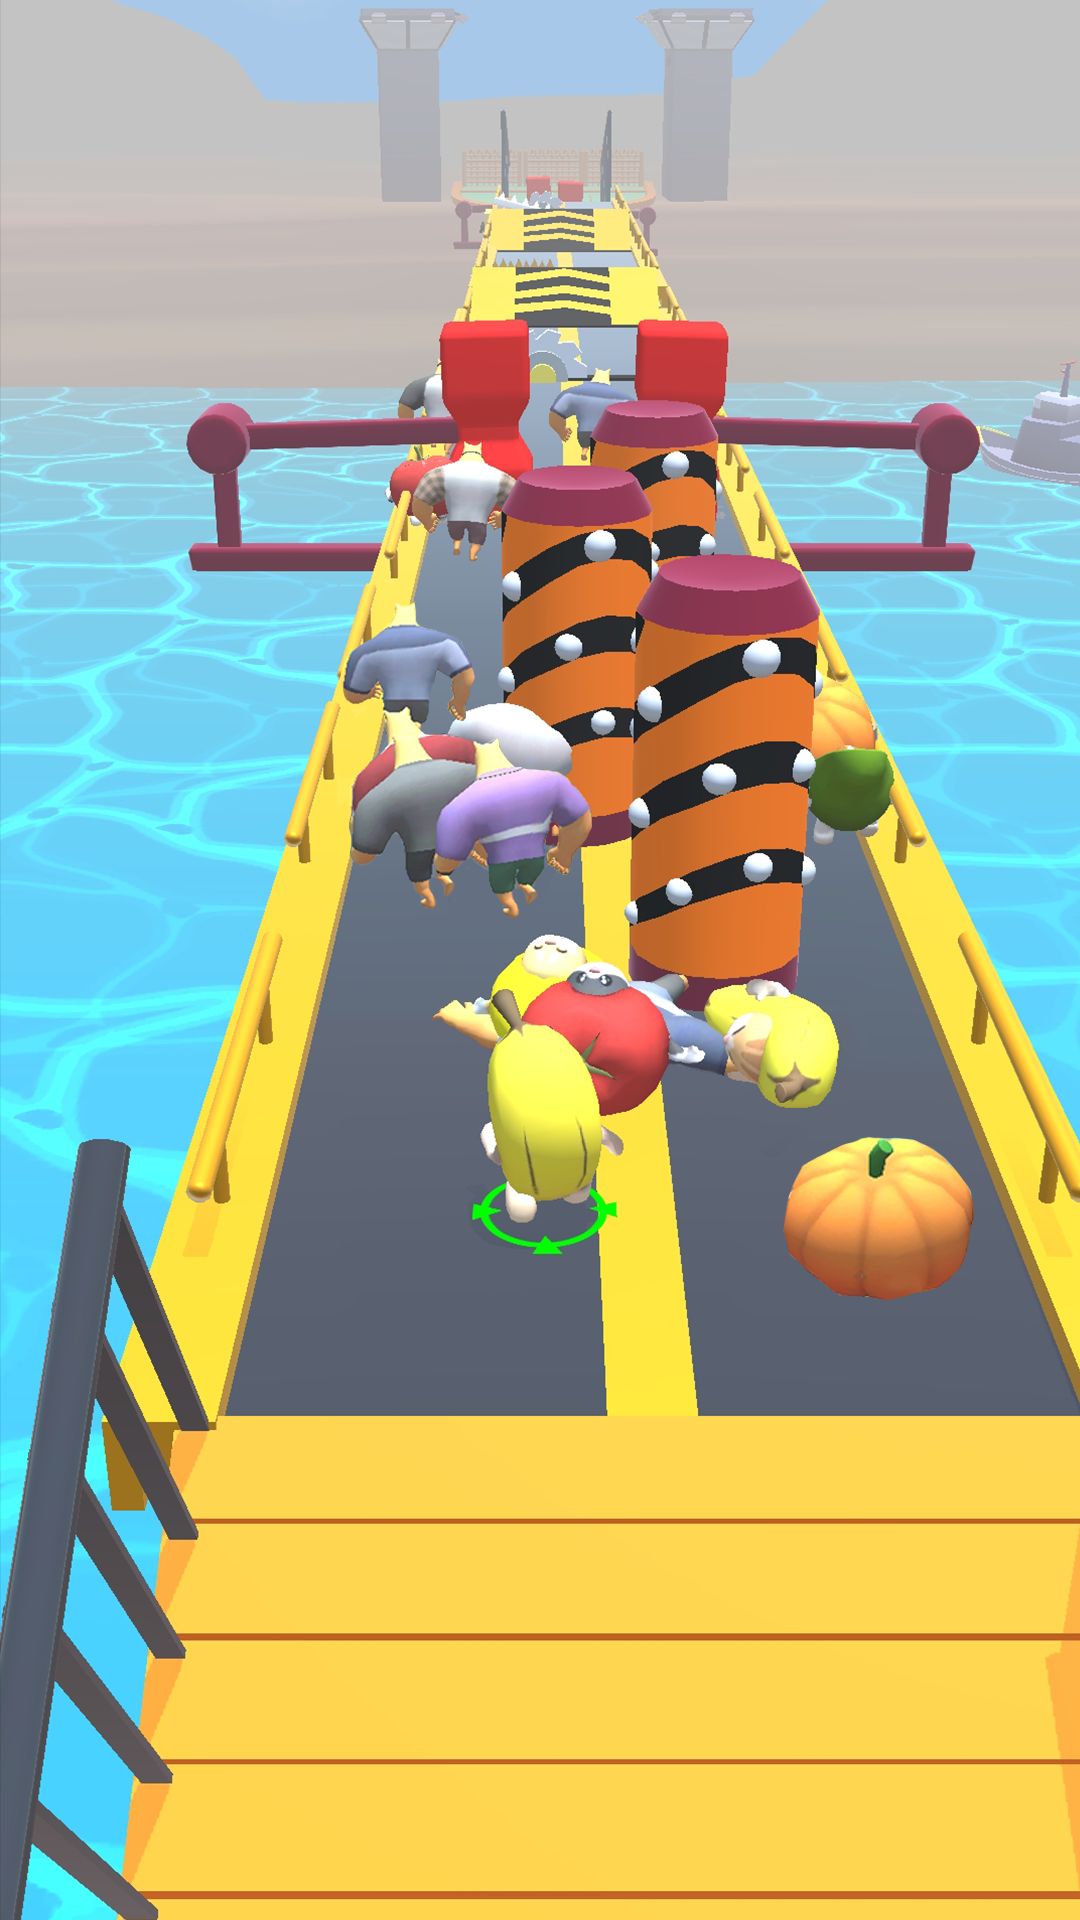 Gameplay of the Banana Survival Master 3D for Android phone or tablet.